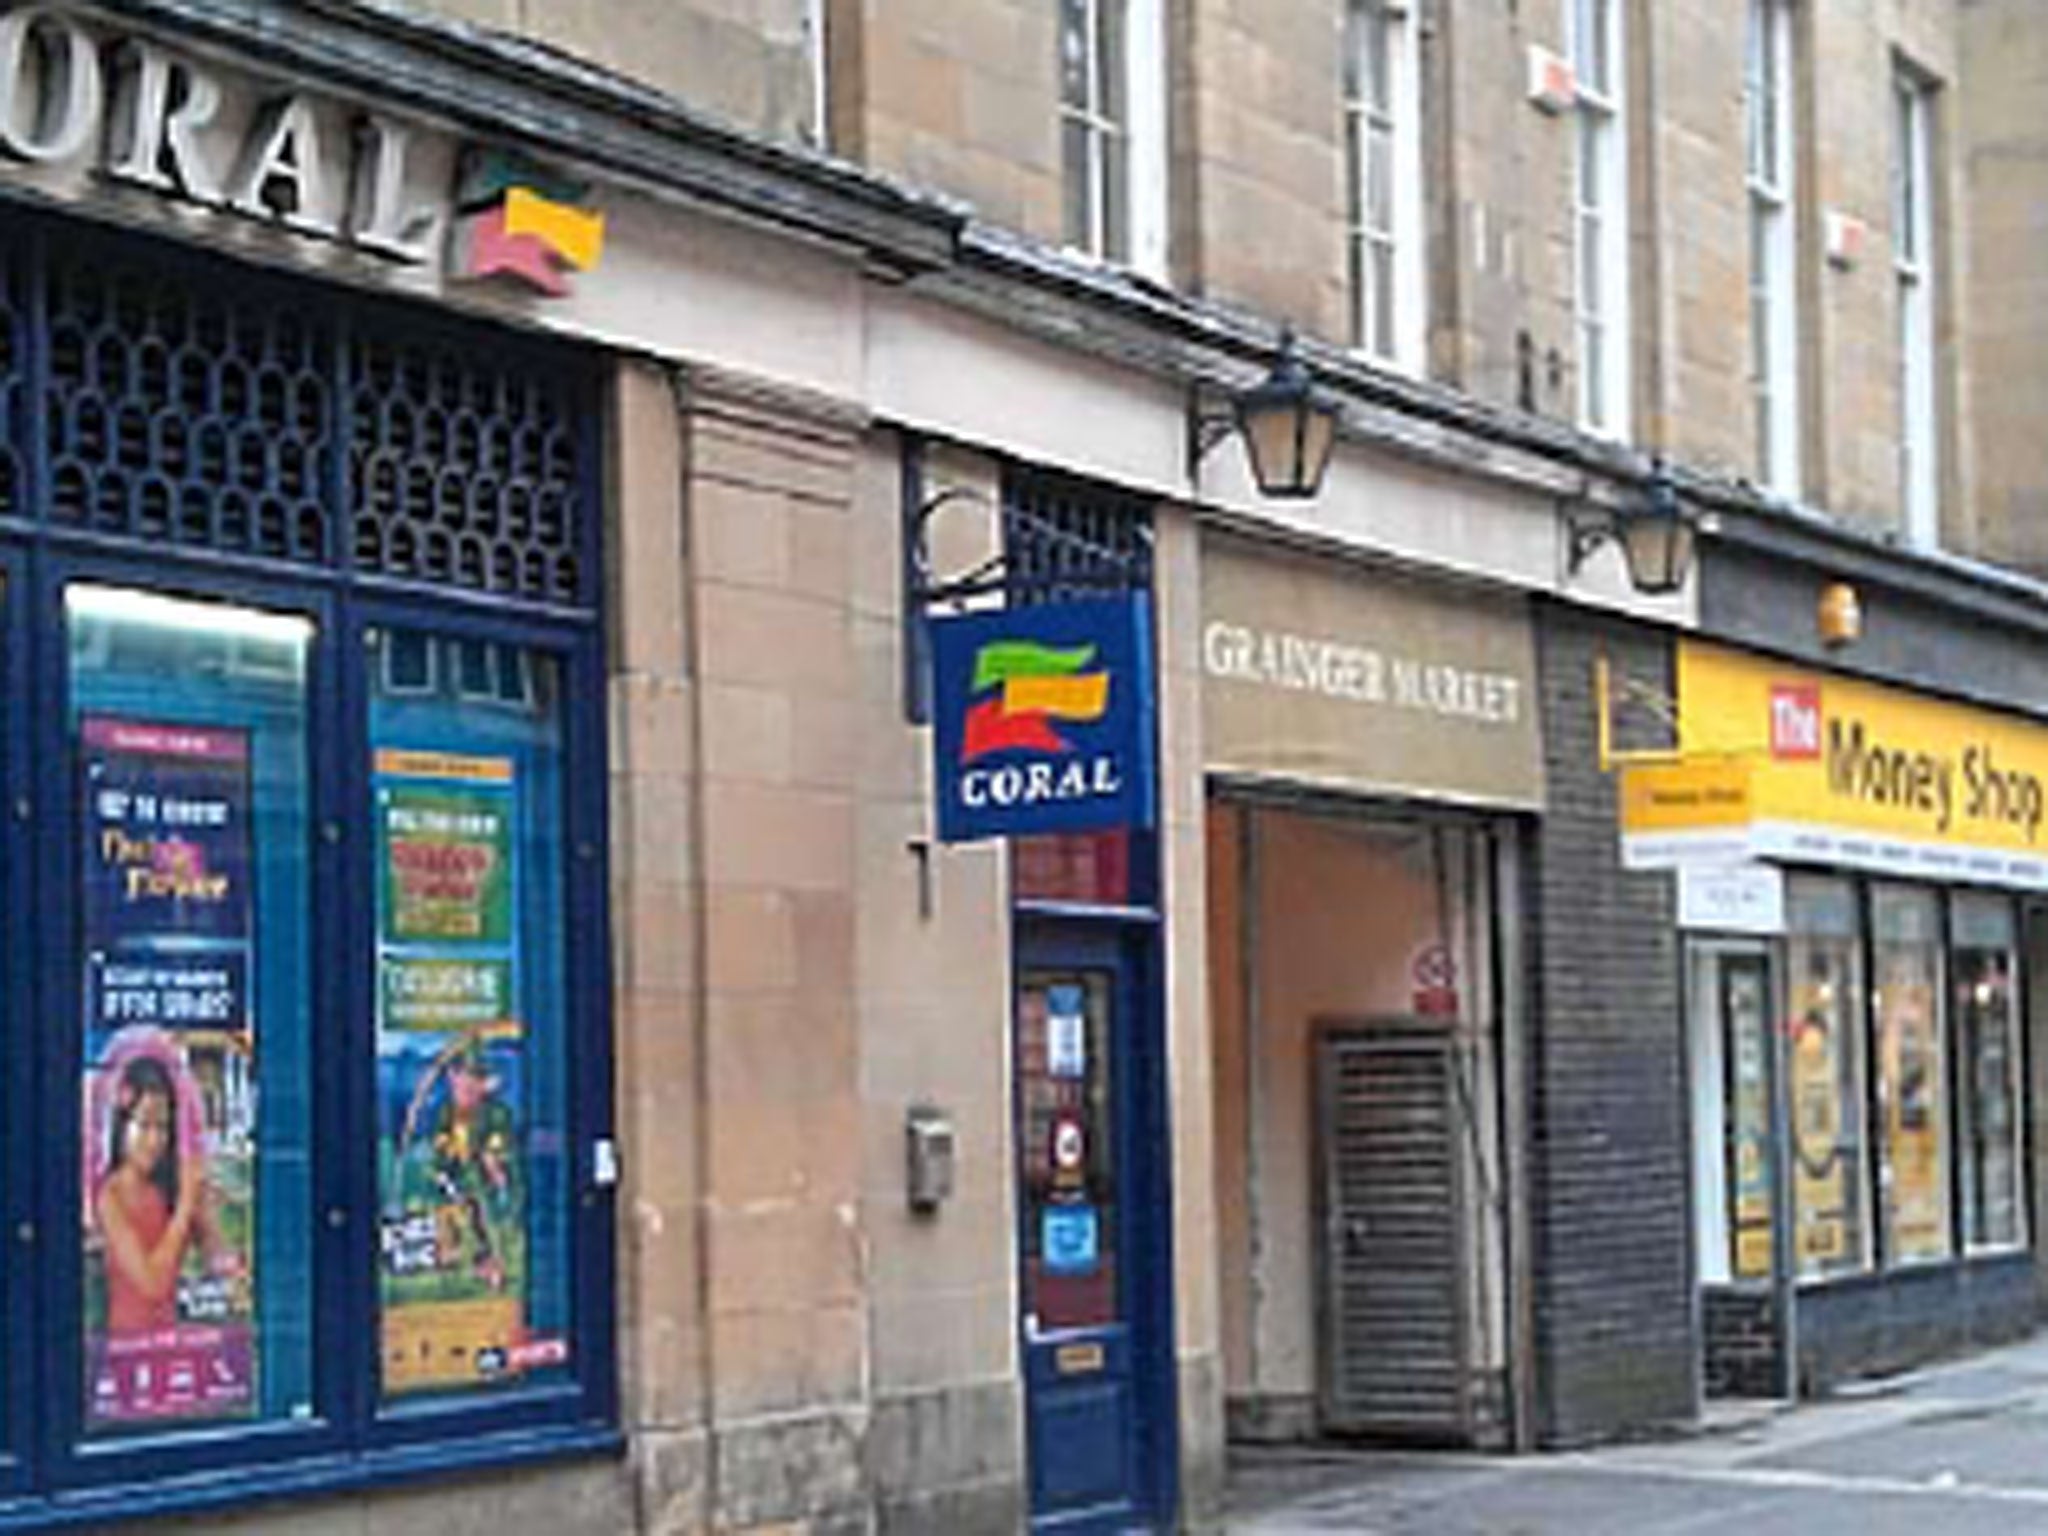 A bookmaker and a branch of The Money Shop almost cheek by jowl in a street in Newcastle